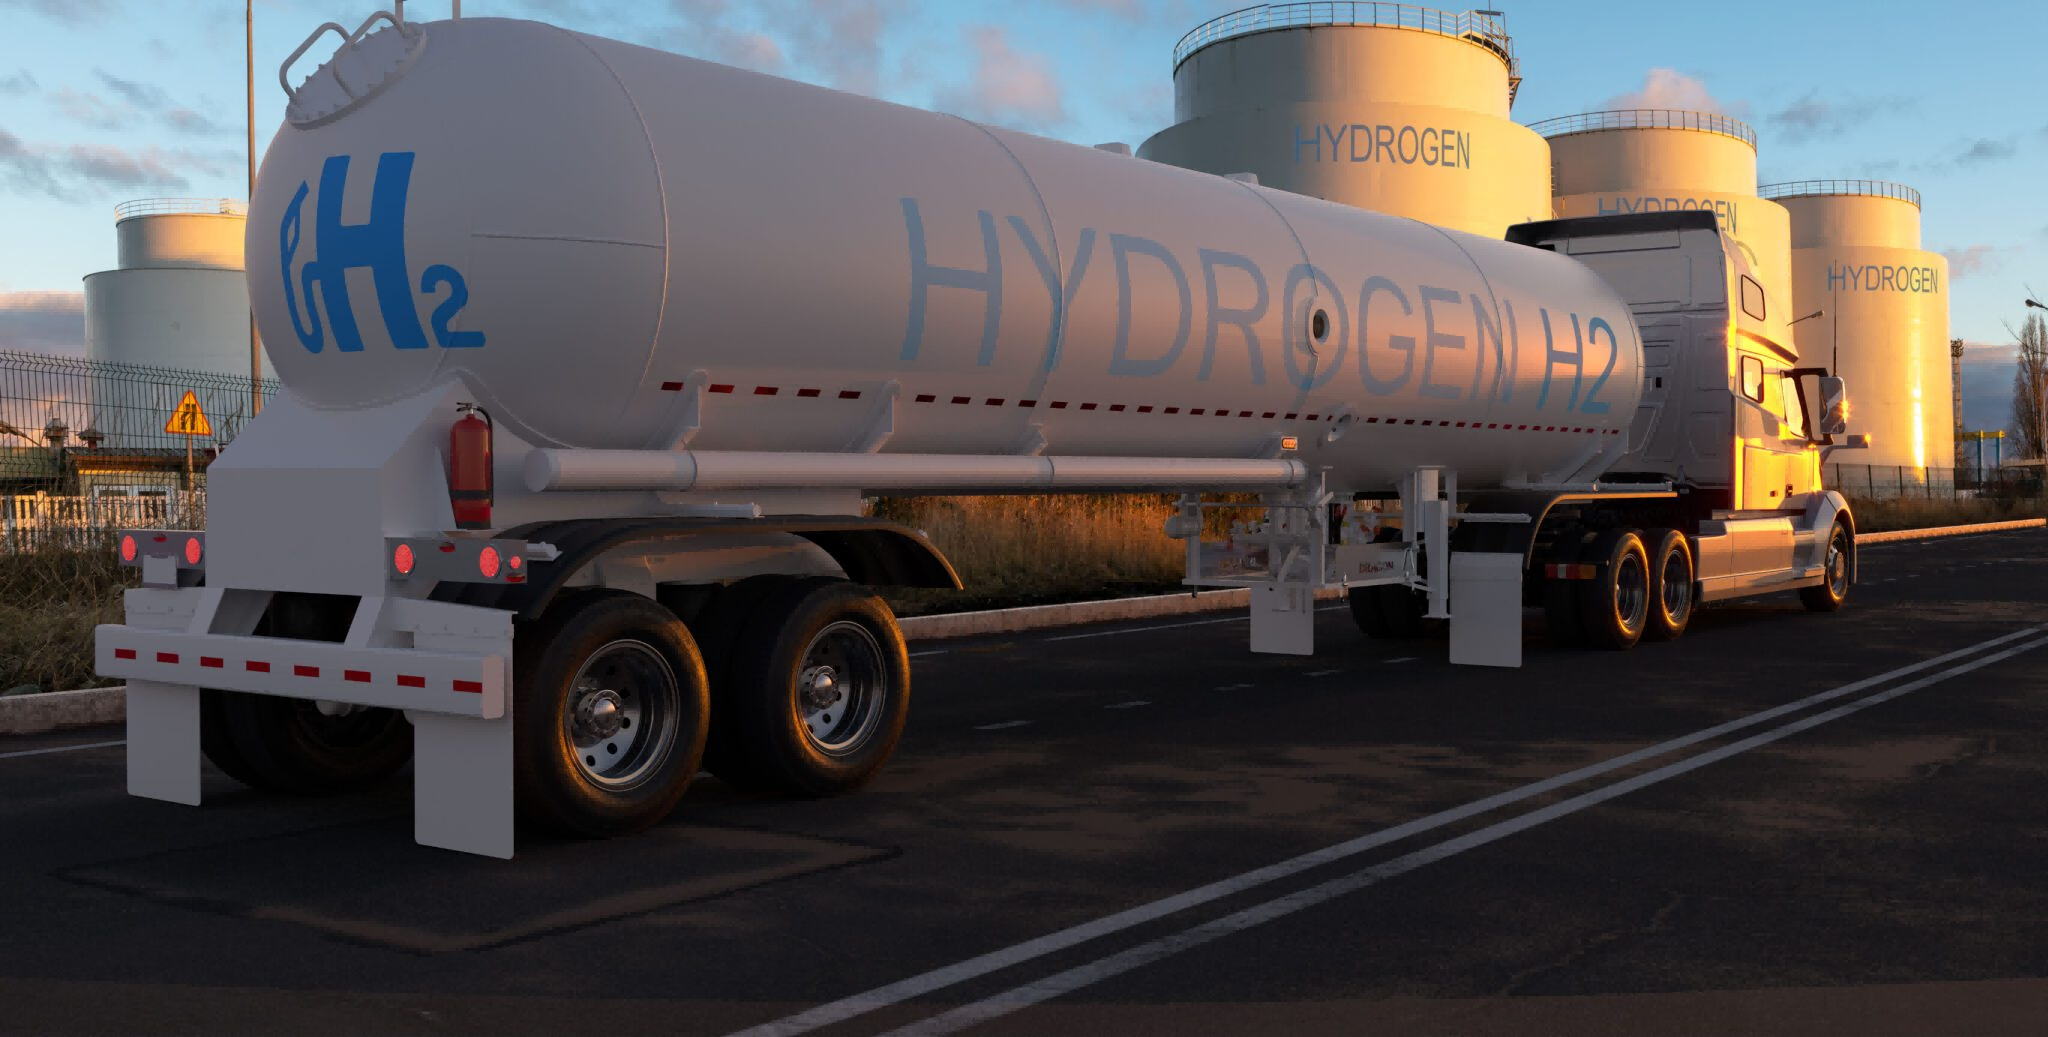 Hydrogen Energy News Weekly Review